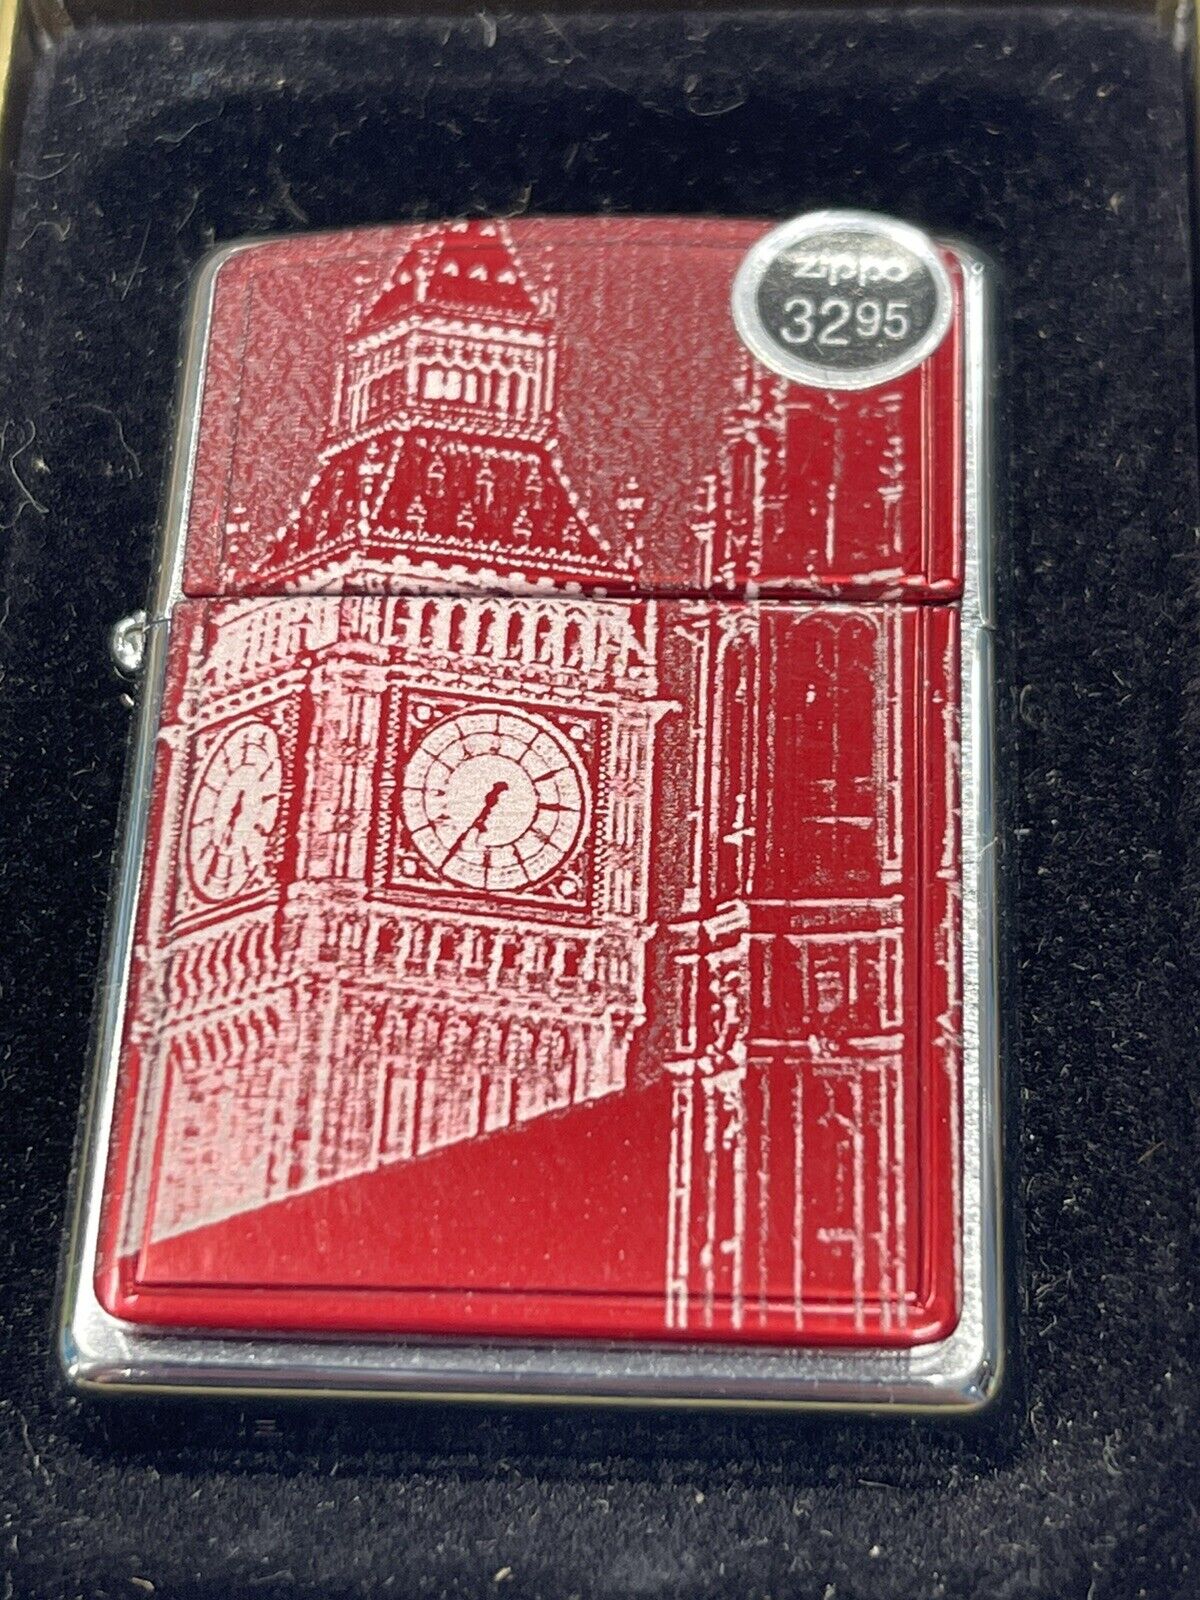 ZIPPO 2003 BIG BEN LONDON RED ANODIZED LIGHTER SEALED IN BOX R440